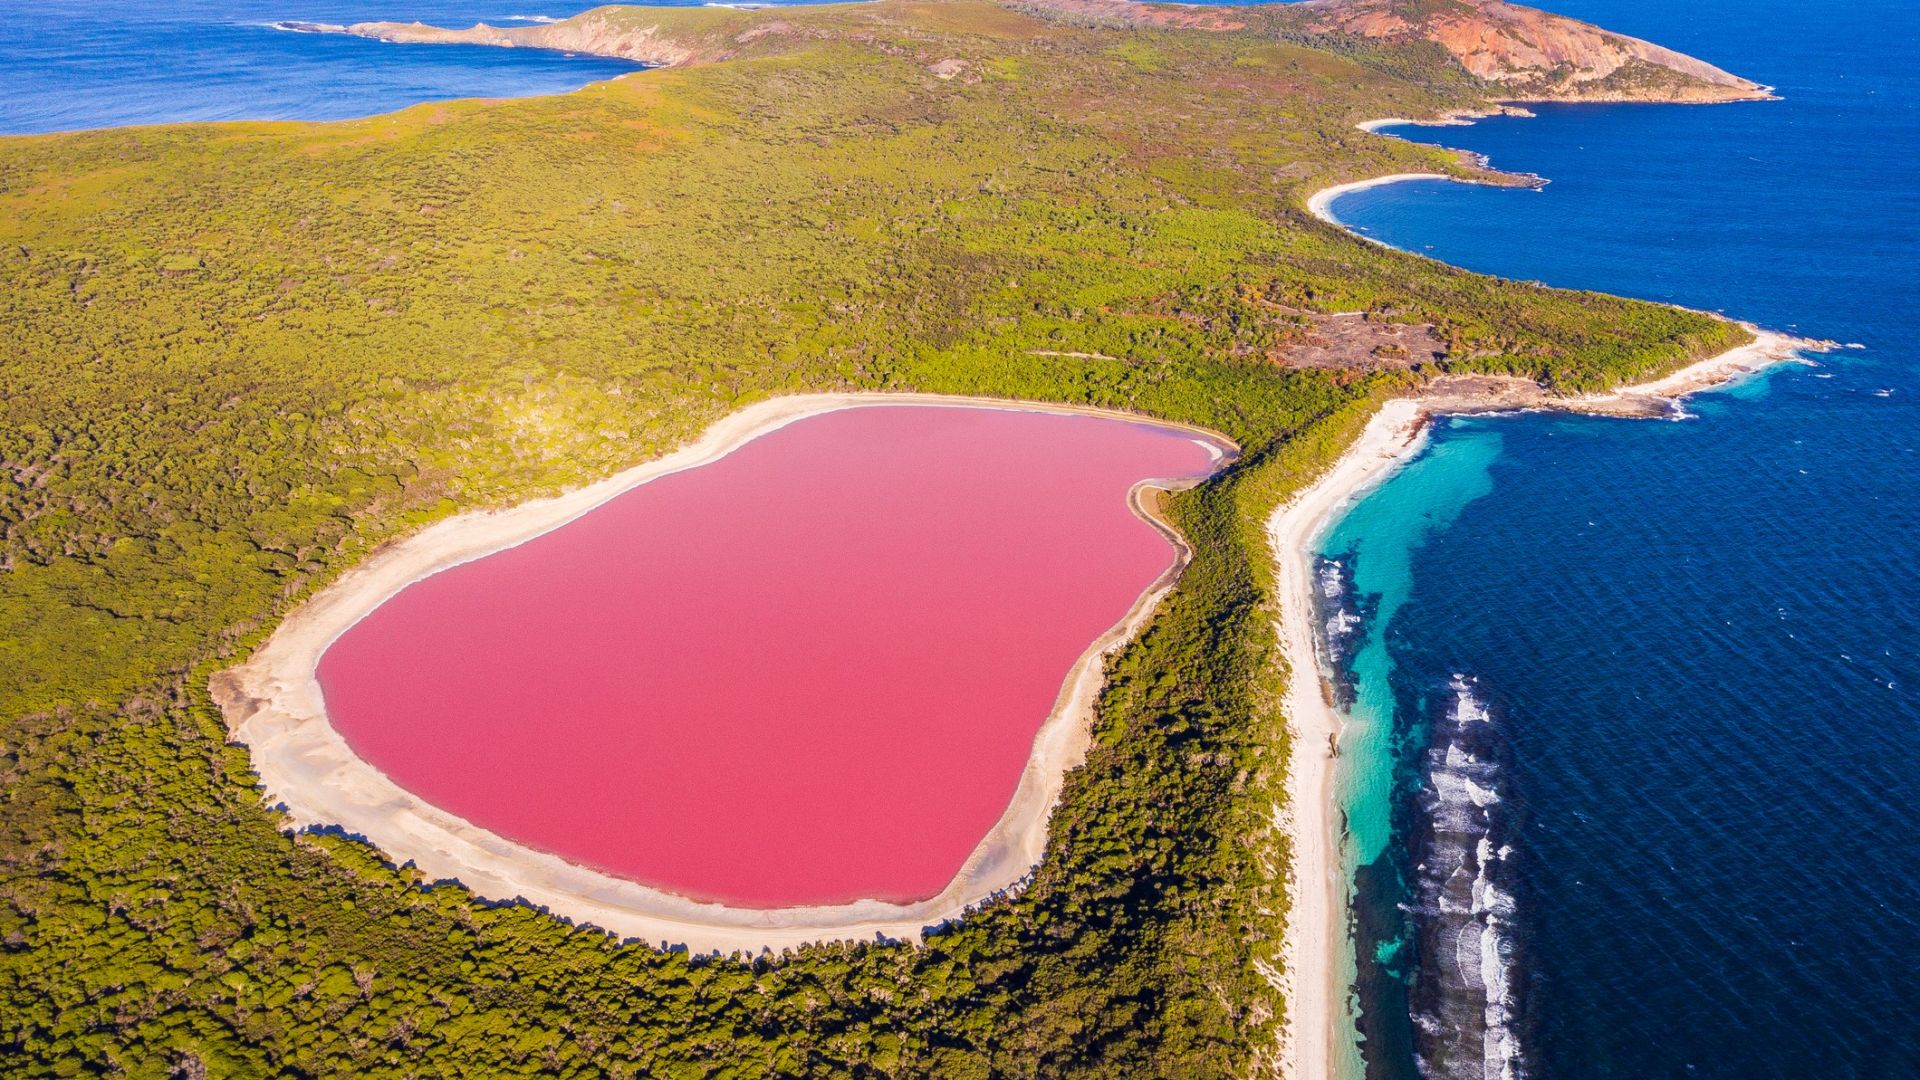 <p>                     Lake Hillier, located on Middle Island, Western Australia, definitely looks like it belongs on another planet. The stark contrast between the pink lake, dark blue waters of the Indian Ocean and the luscious green forest are remarkable.                    </p>                                      <p>                     According to the travel website Hiller Lake, scientists are not 100% sure how the lake gets its rosy pink hue. The most likely suspect is the <em>Dunaliella salina</em> microalgae found in the lake, which produce carotenoids — a red pigment. But halophilic "salt-loving" bacteria in the salt crusts may also play a role. It has also been suggested that a reaction between the salt and sodium bicarbonate could be altering the color of the lake.                    </p>                                      <p>                     The mysterious salmon-pink lake is approximately 2000 feet (600 m) long and 820 ft (250 m) wide and is best viewed from the air.                    </p>